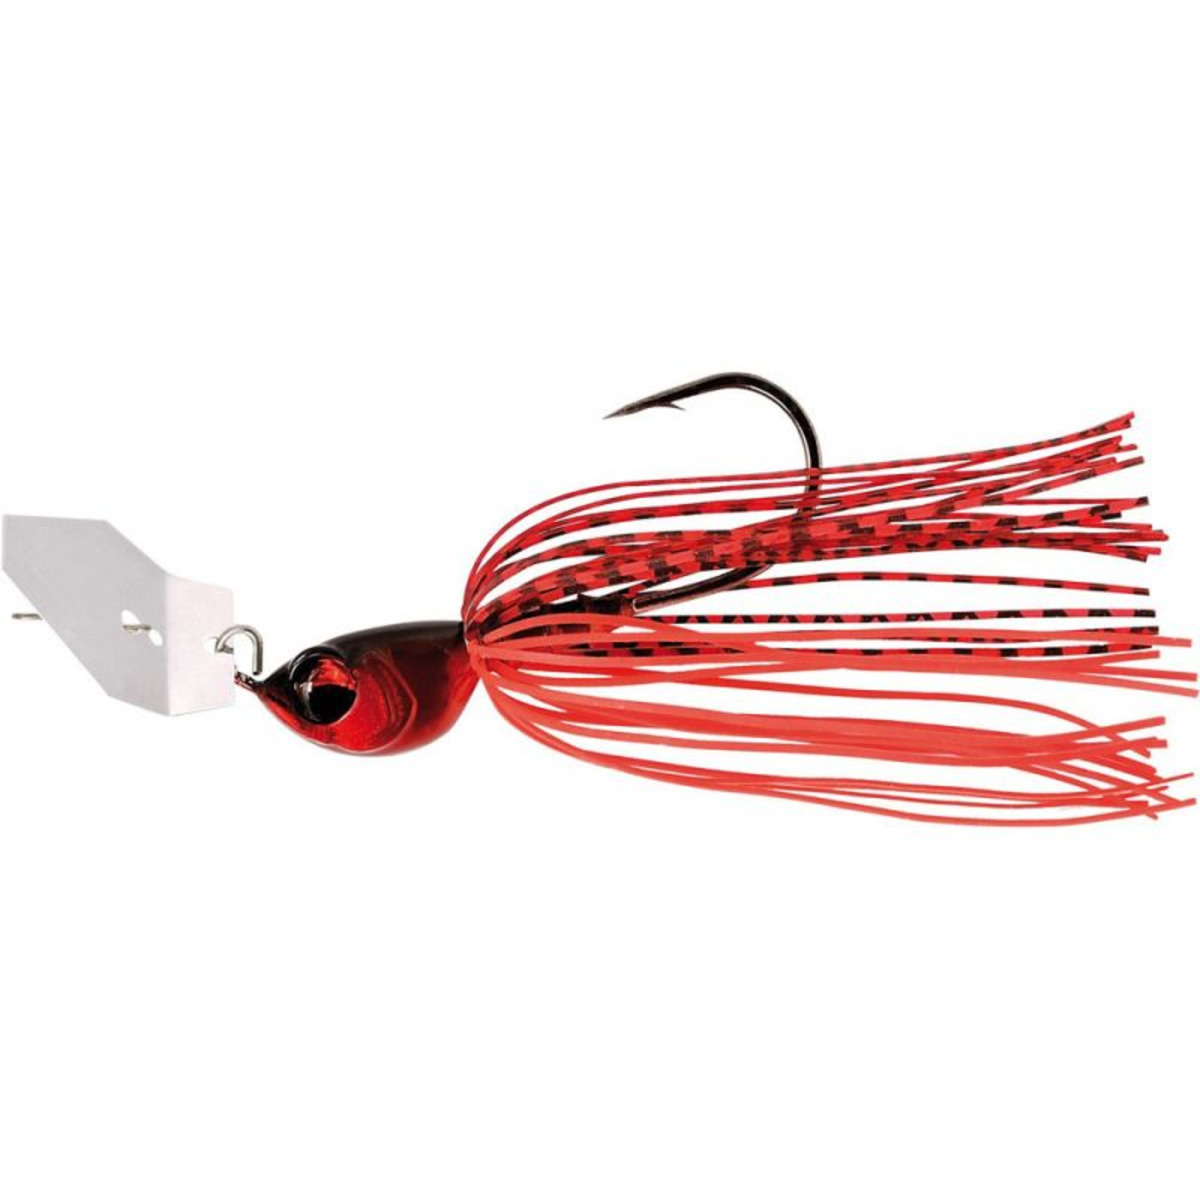 Rapture Chatterbait - 10.5 g - Texas Red